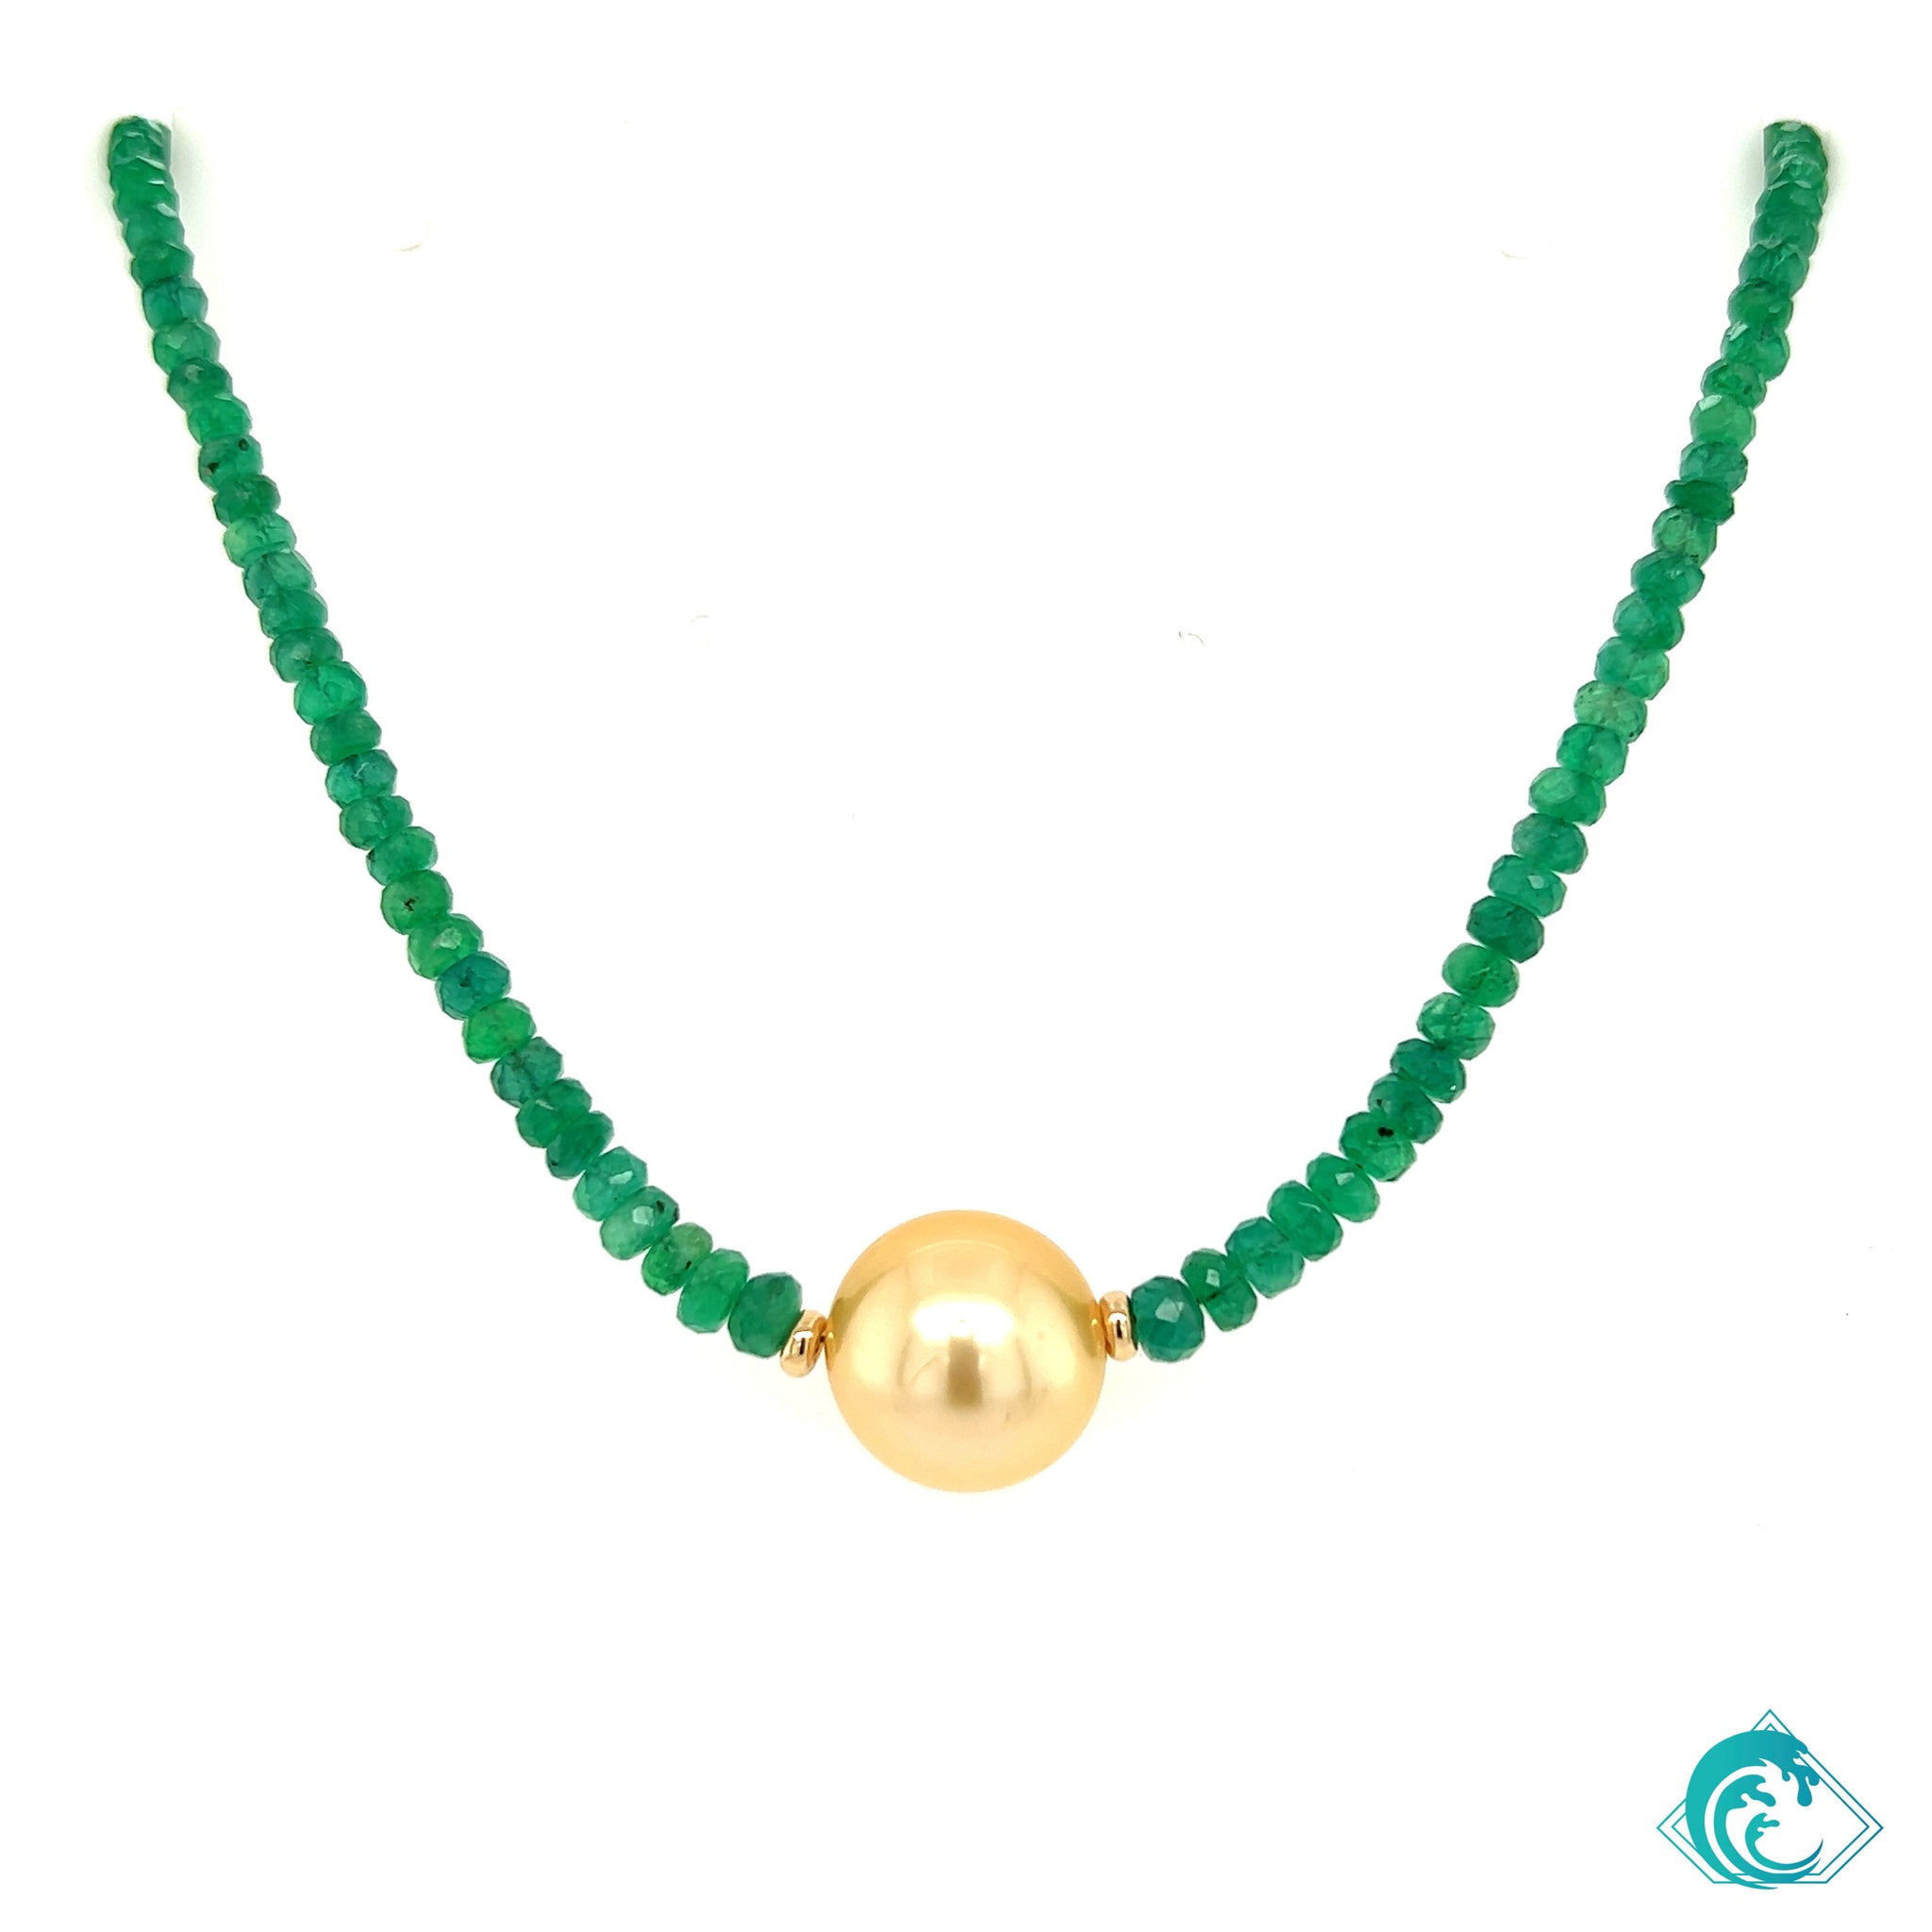 14KY Golden Indonesian Pearl & Emerald Necklace